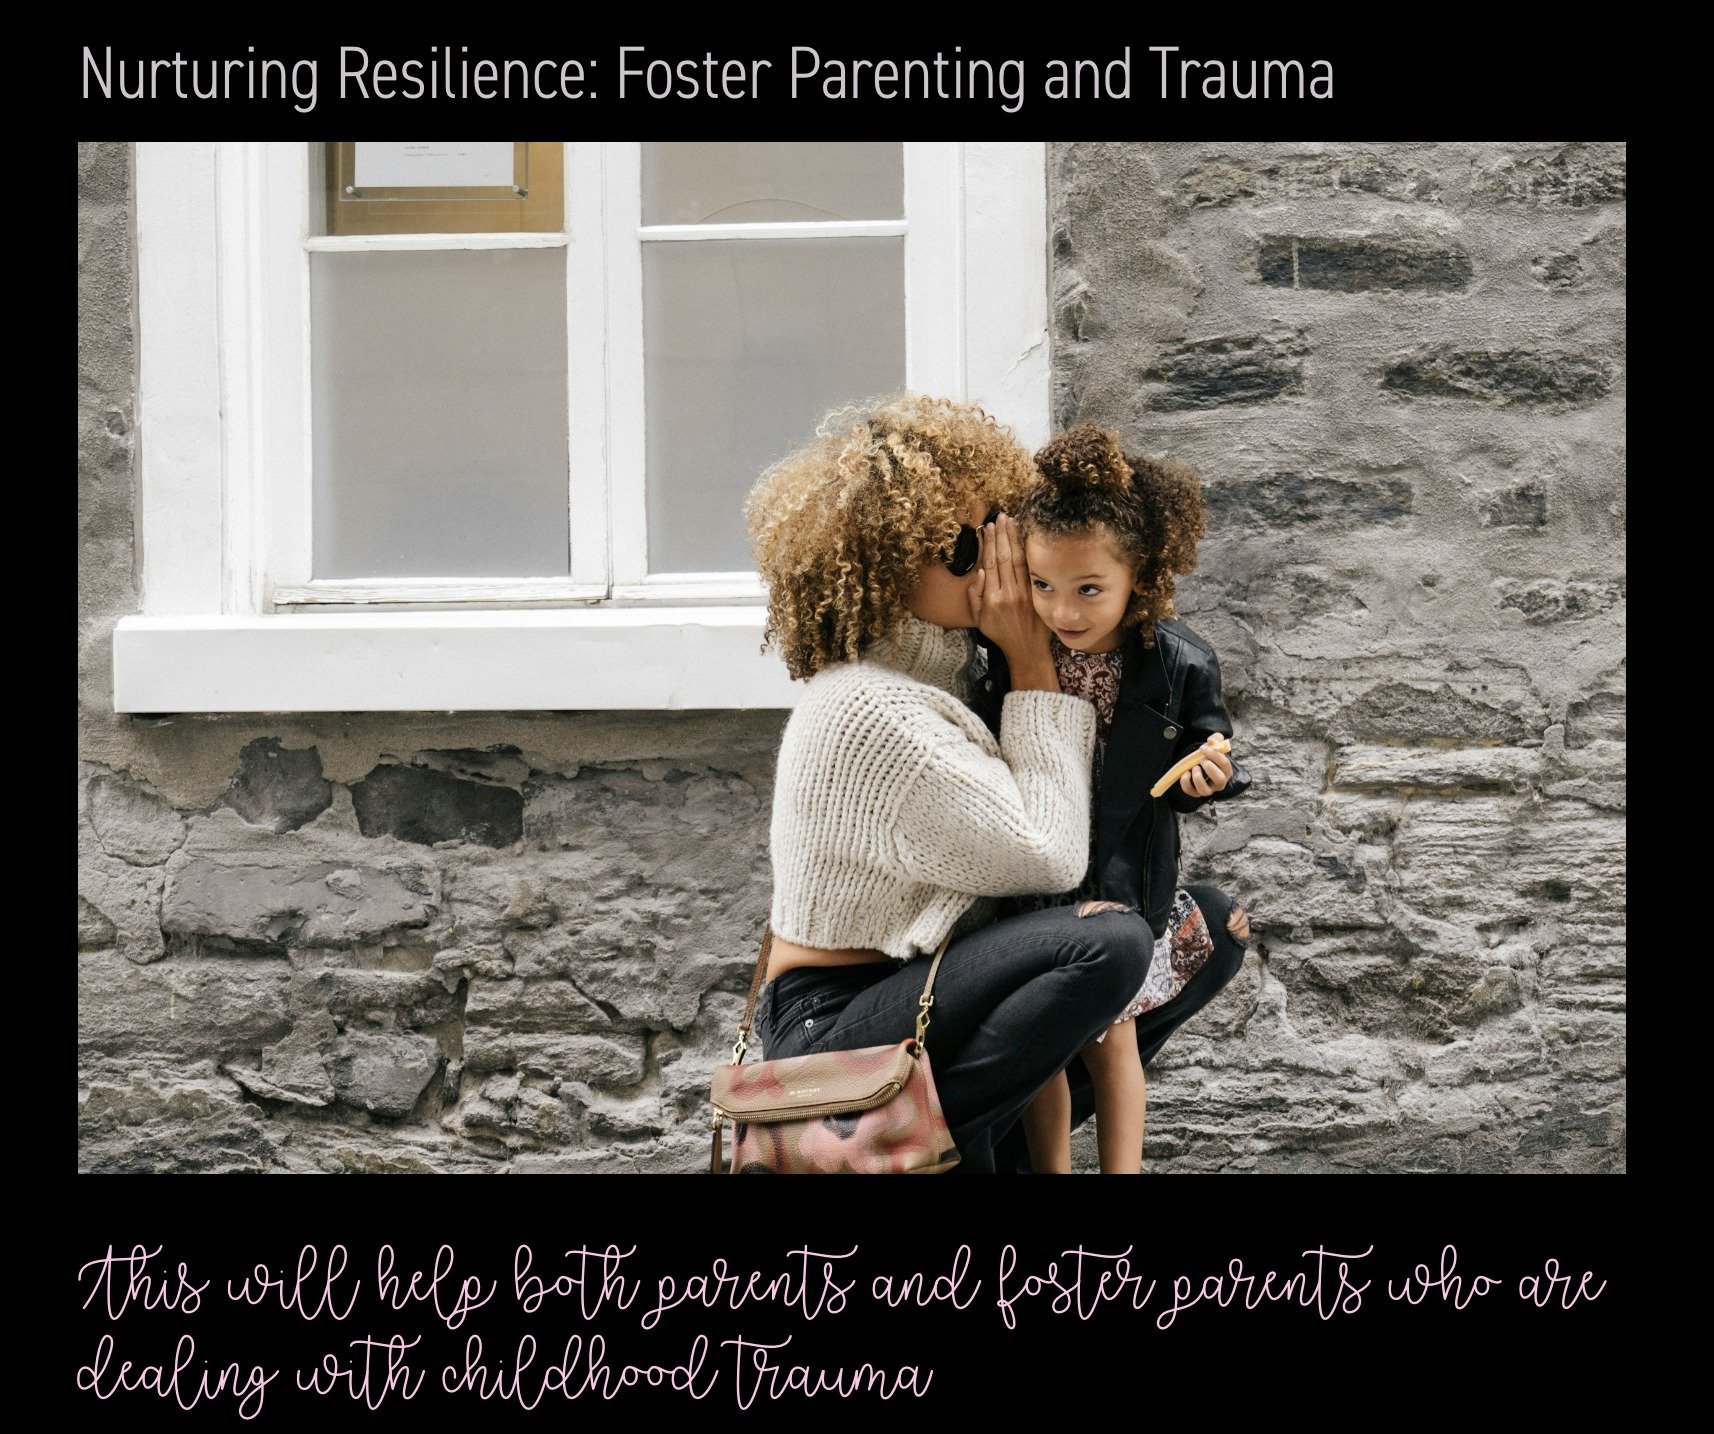 Resilience in foster care🌟
We hear a lot about it
But what does it mean

This week's blog dives into effective parenting tools for supporting children who've experienced trauma 

🖲From understanding trauma signs to tackling secondary trauma, I've g